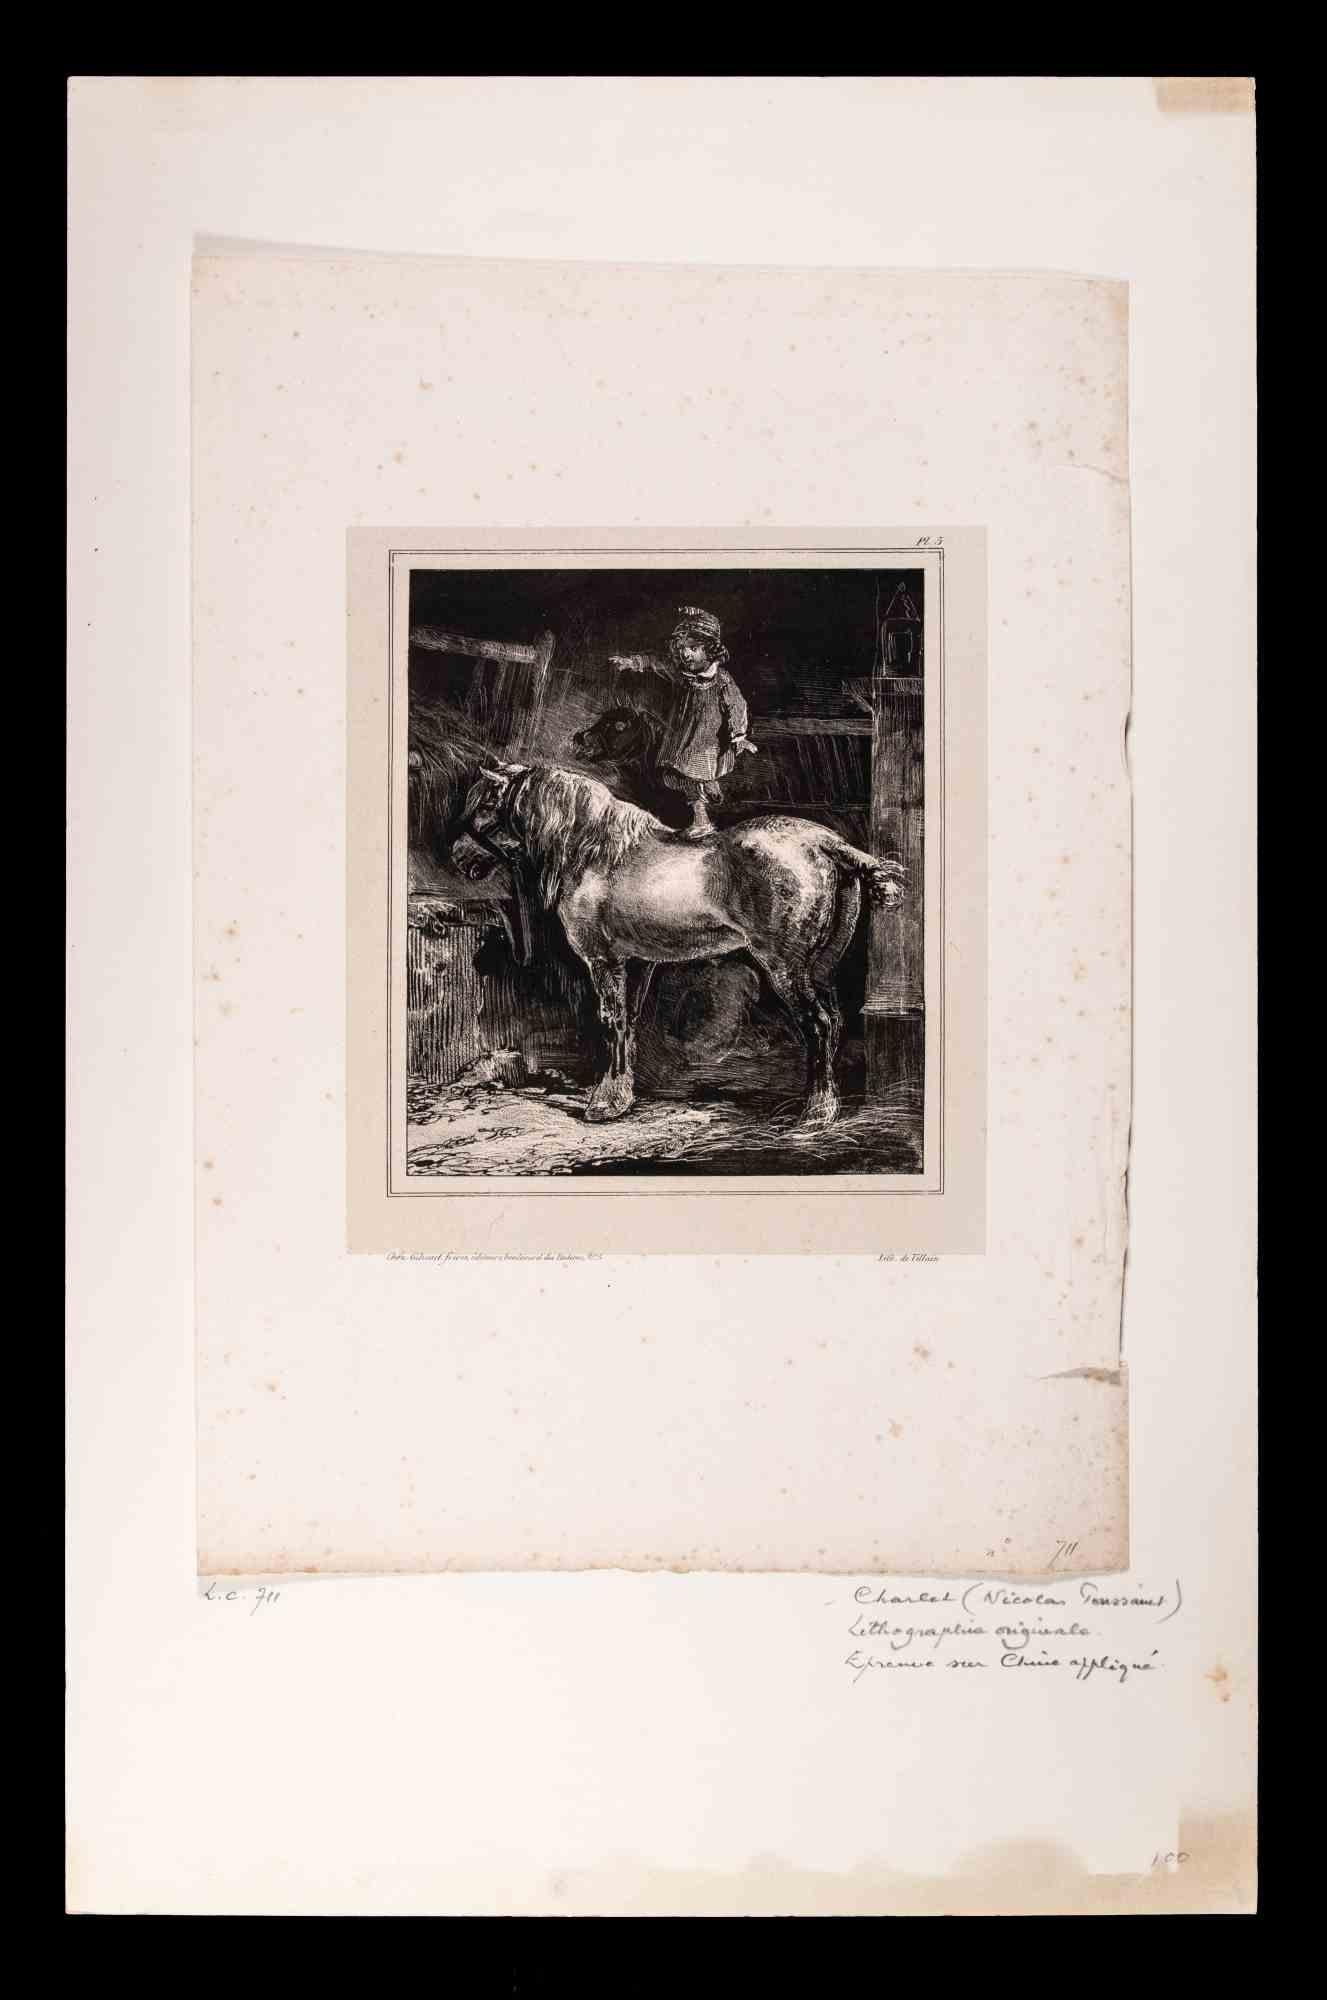 The Child  - Original Lithograph by N. Toussaint Charlet - Early 19th Century - Print by Nicolas Toussaint Charlet